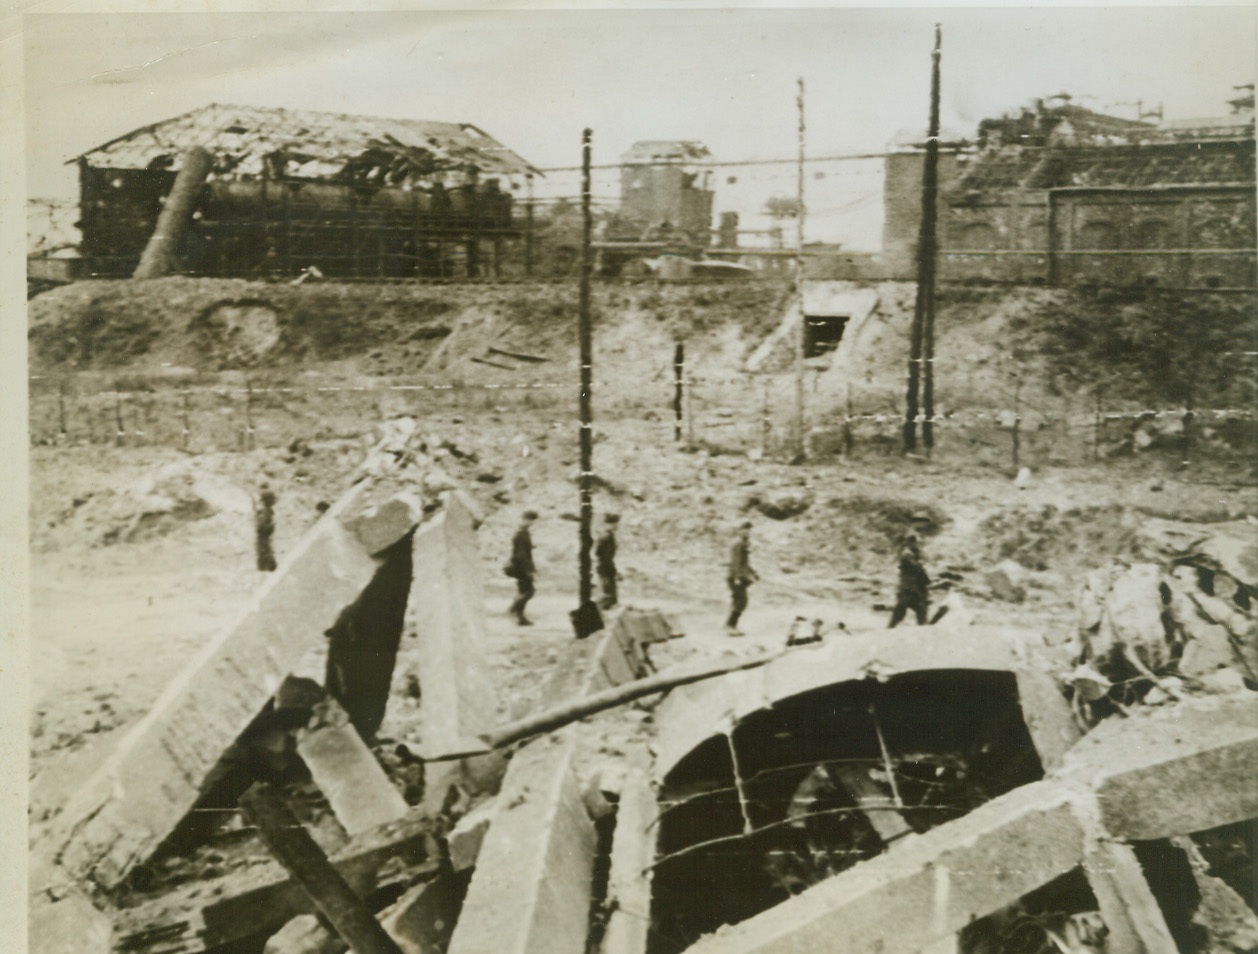 Nazi Prisoners and Desolation, 7/21/1944.France—Captured in the great Allied break-through beyond Caen, Nazi prisoners file dejectedly past the ruins of a water tower that was part of a factory in the industrial area outside Caen. Entire area is a mass of ruins as a result of the awesome artillery barrages that swept the territory. Credit: British war office photo via Signal Corps radiotelephoto from ACME;